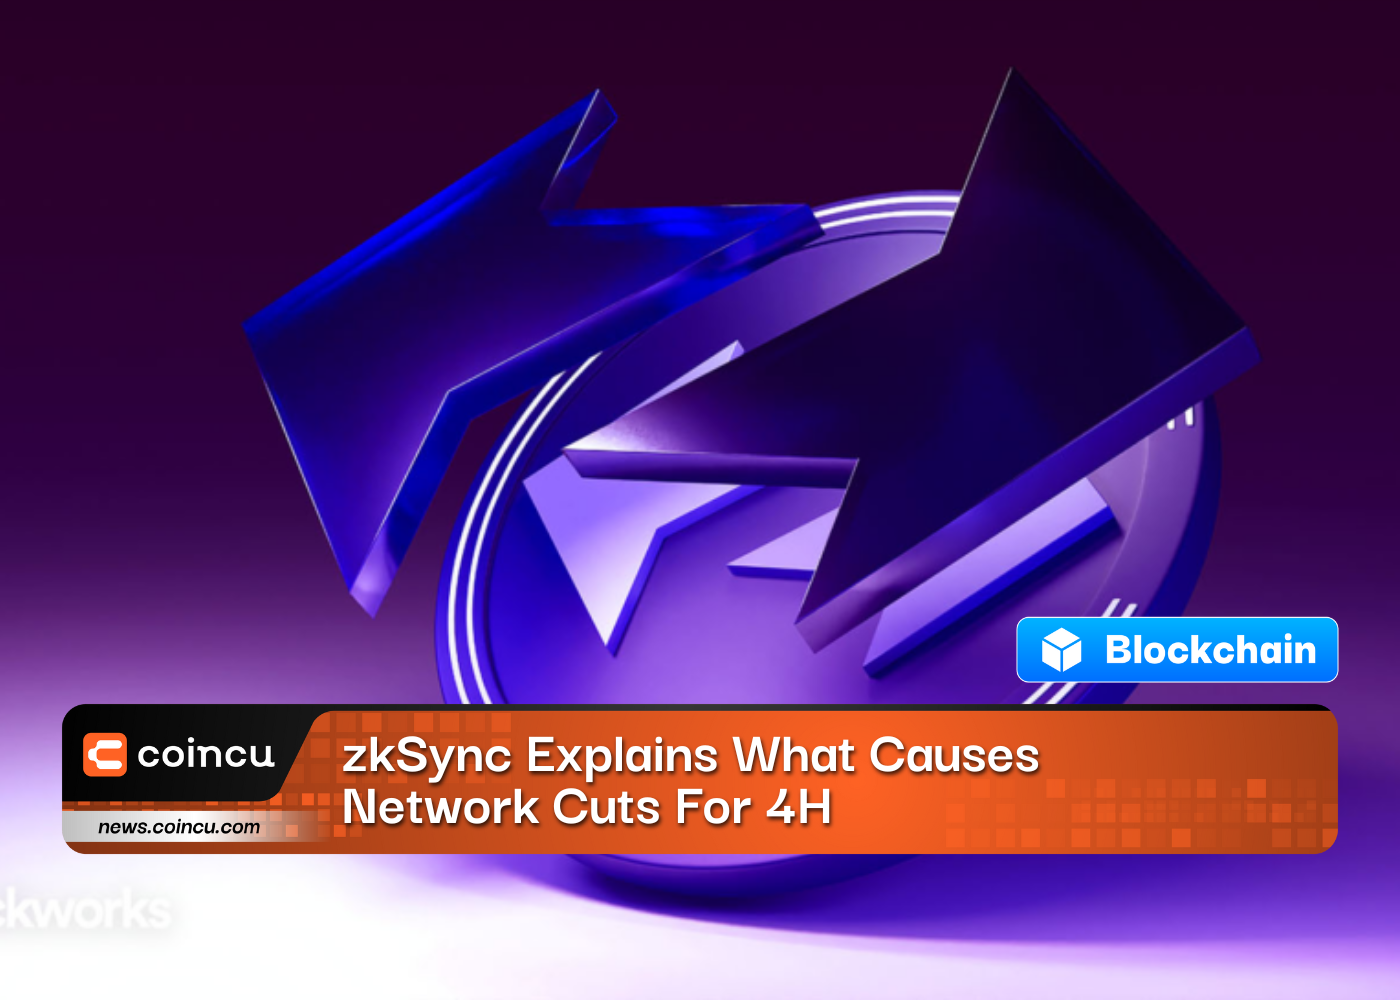 zkSync Explains What Causes Network Cuts For 4H